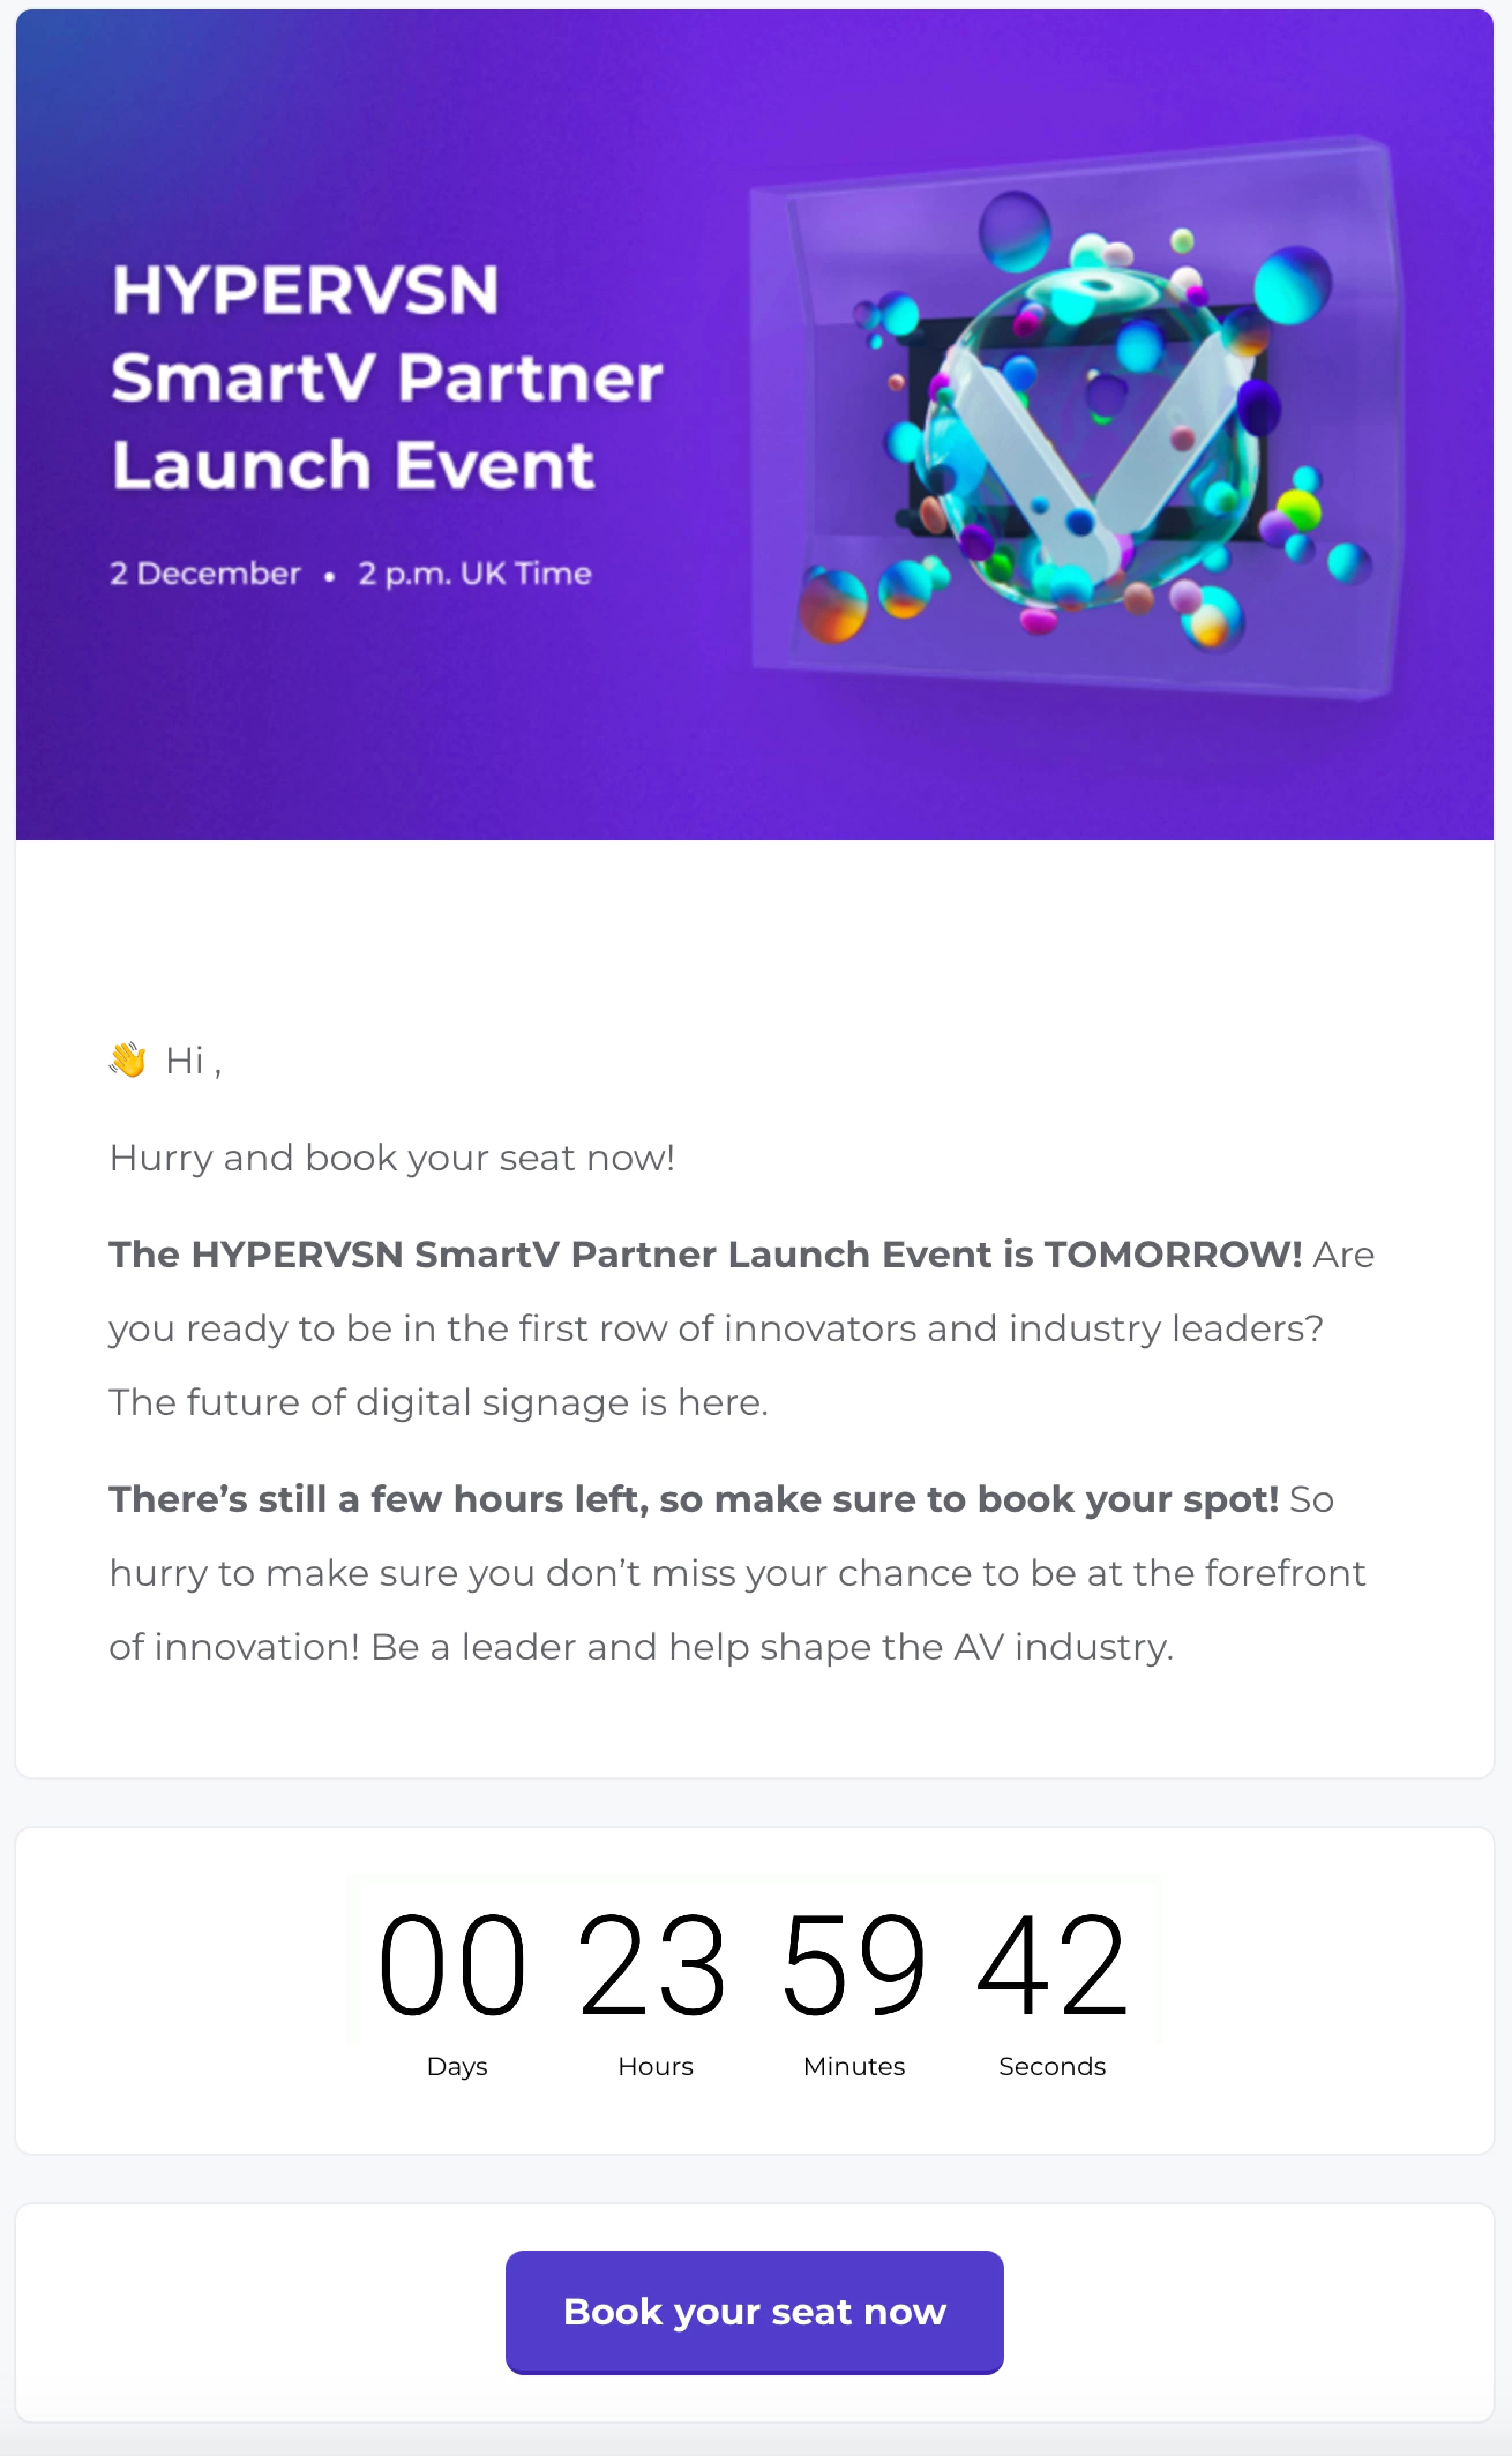 Event invitation email example from HYPERVSN - MailerLite